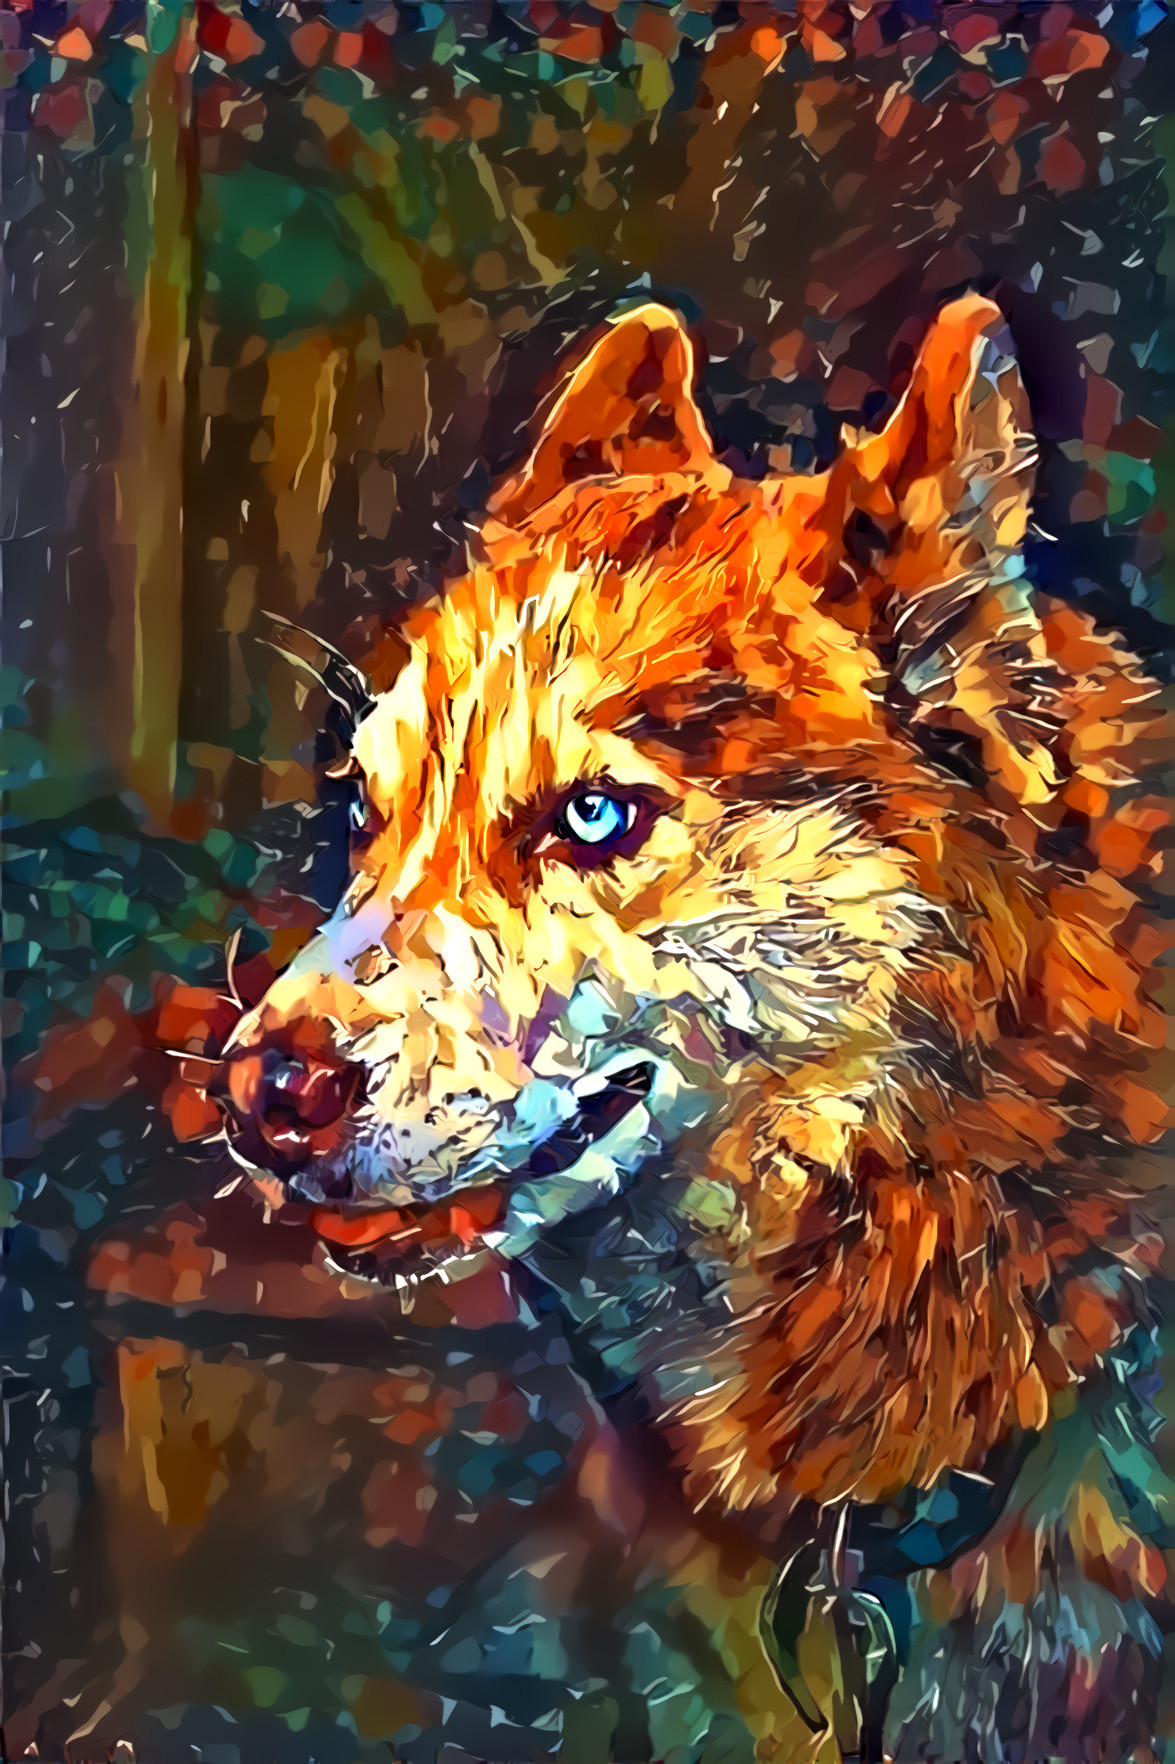 Pet Painting [FHD]